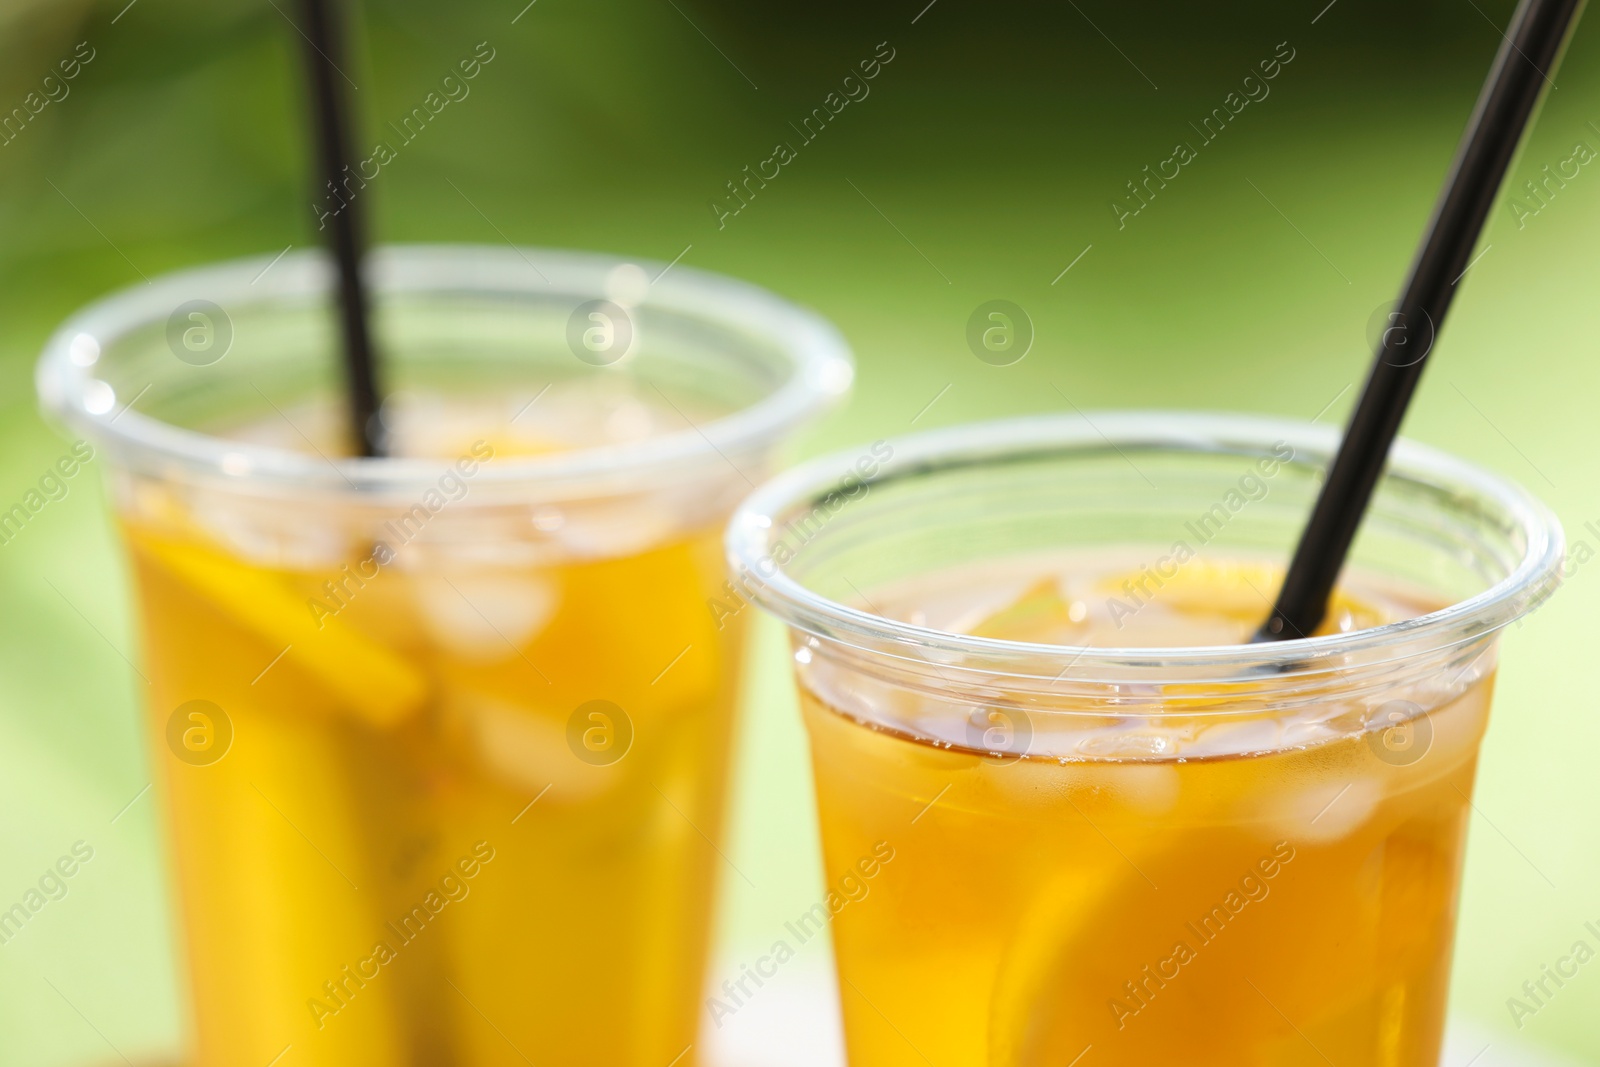 Photo of Plastic cups of tasty iced tea with lemon against blurred green background, closeup